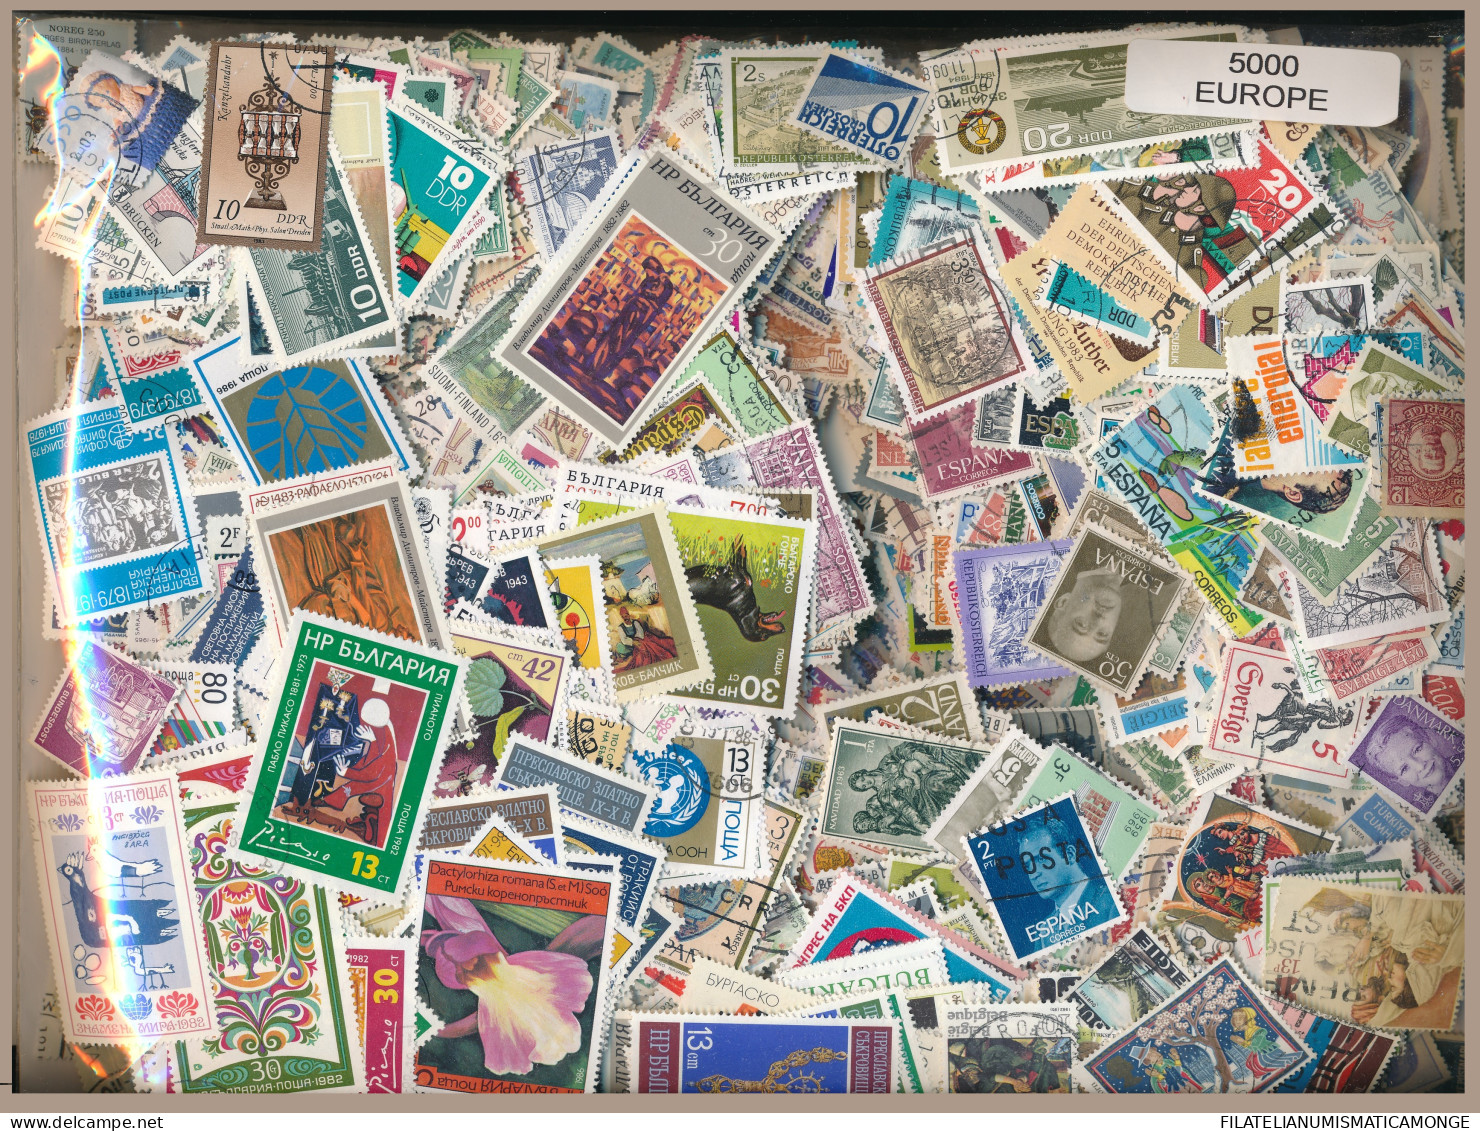  Offer - Lot Stamps - Paqueteria  Paises Europeos 5000 Sellos Diferentes        - Vrac (min 1000 Timbres)